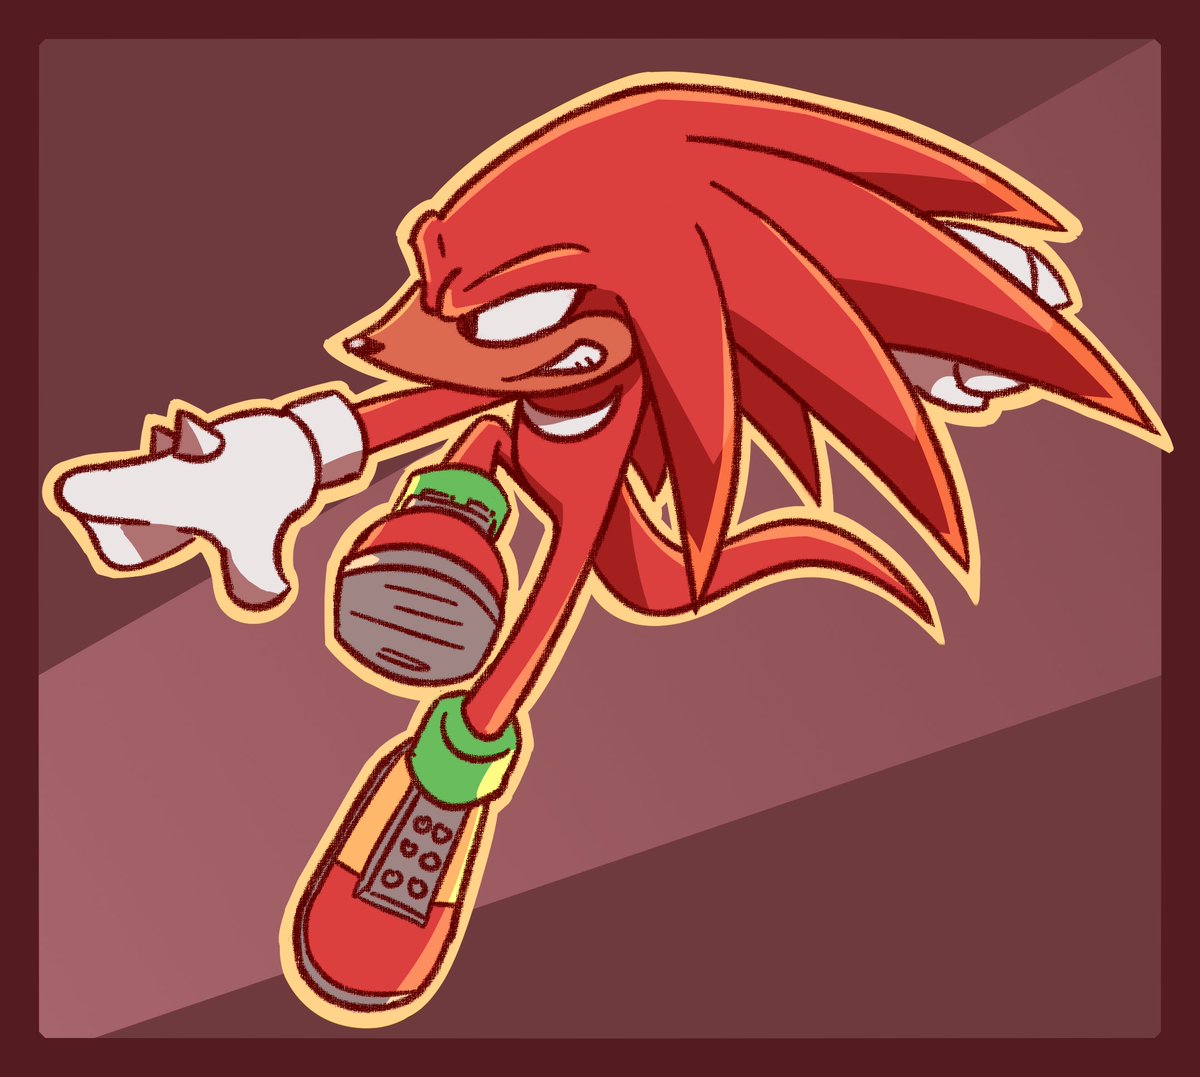 another sonic x redraw wooahhhh who coulda guessed that i like doing sonic x redraws LOL

#KnucklesTheEchidna #SonicX